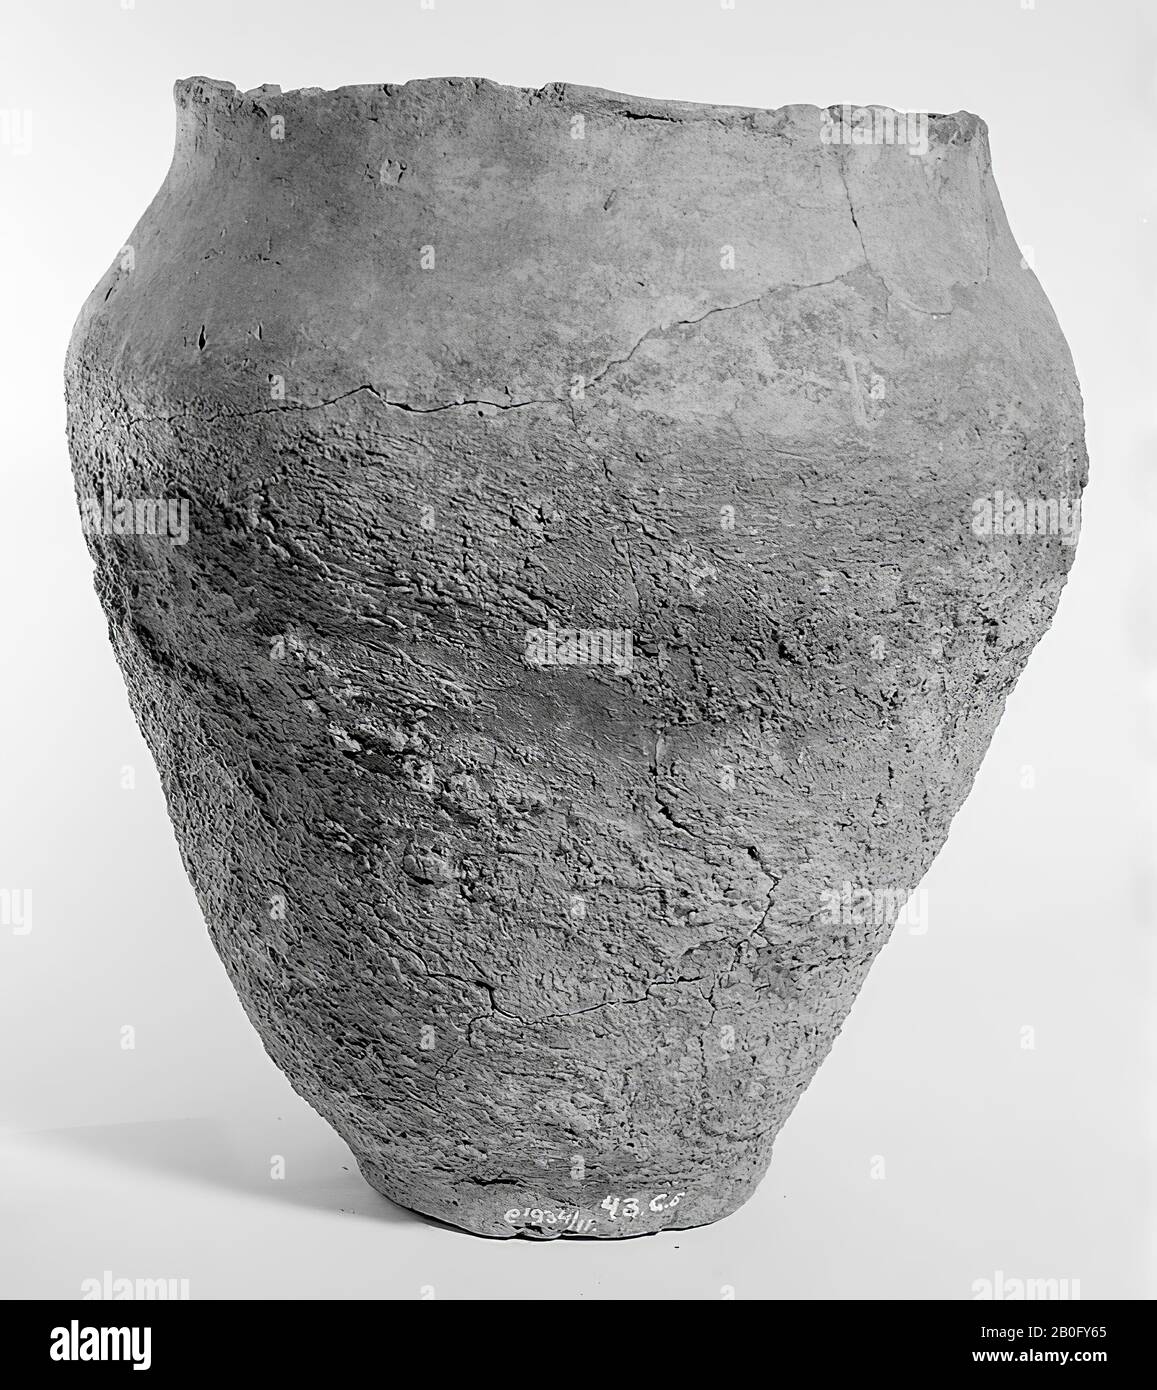 Large Germanic urn of earthenware with serrated edge. Glueing and additions. Contains cremated residues, urn, earthenware, h: 30 cm, diam: 25.5 cm, prehistory -800 Stock Photo